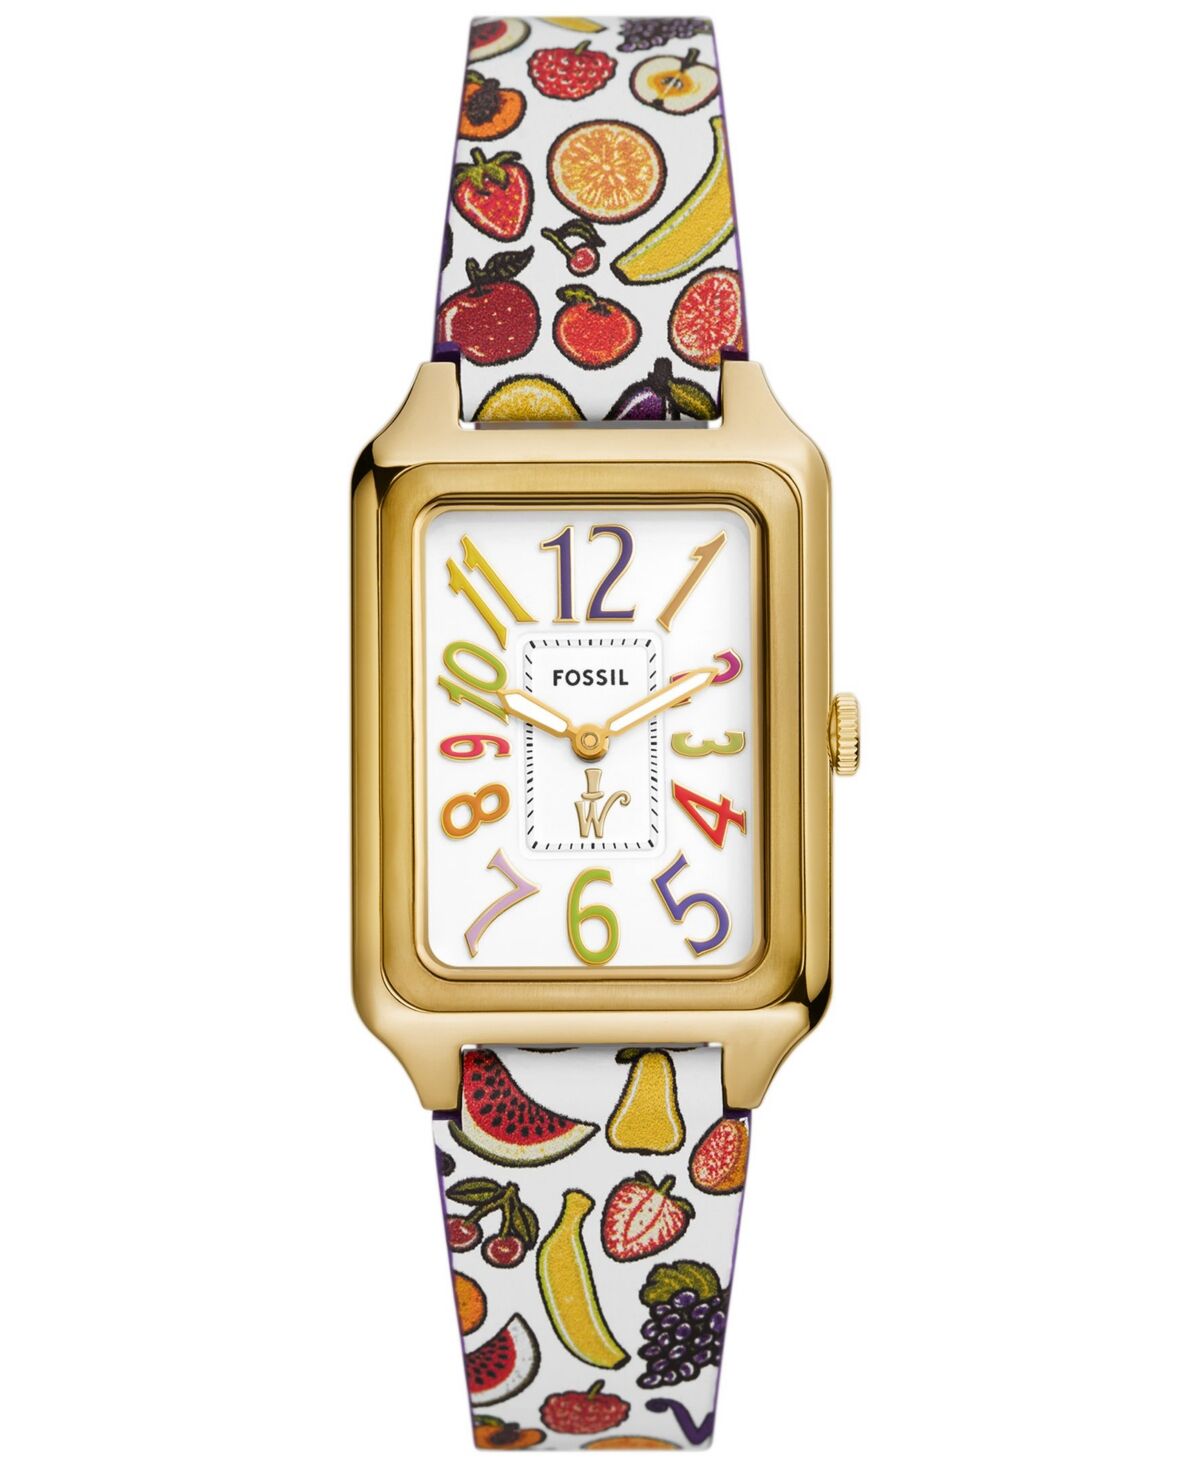 Fossil X Willy Wonka Limited Edition Women's Two-Hand Multicolor Print Leather Watch 26mm - Multi